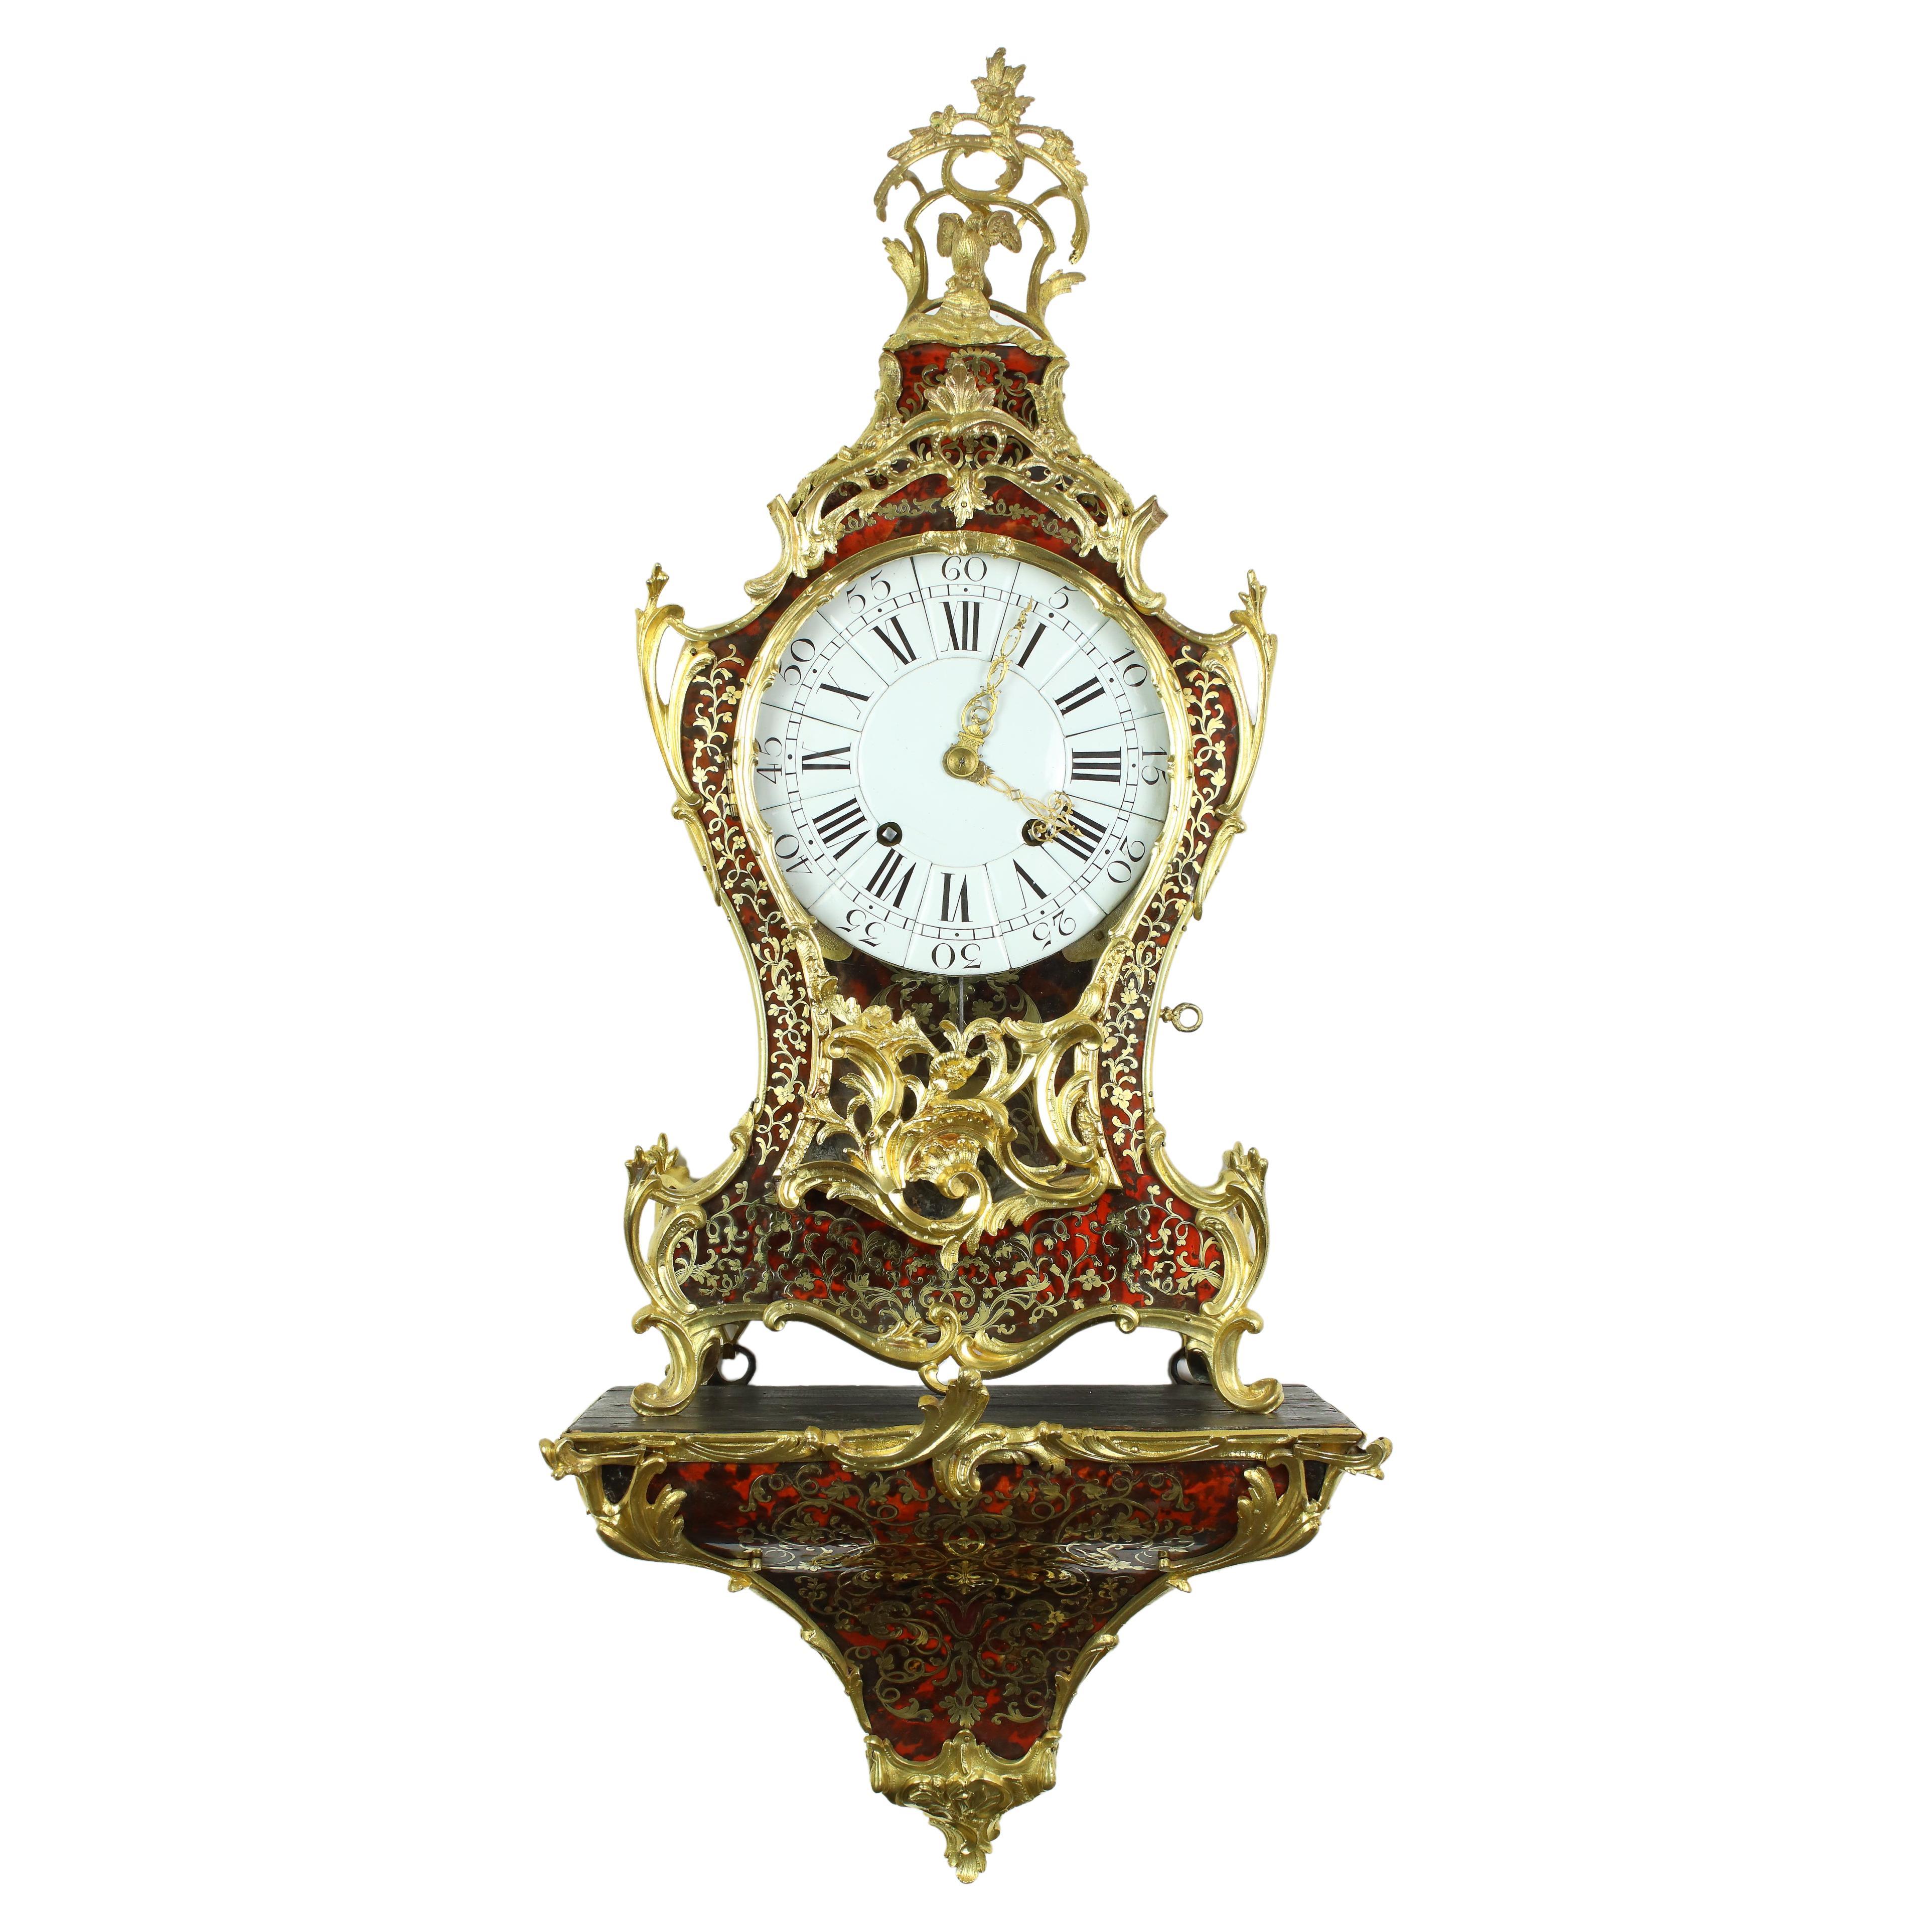 18th Century French Boulle Gilt Bronze Wall Console Clock, Signed "Gribelin" For Sale